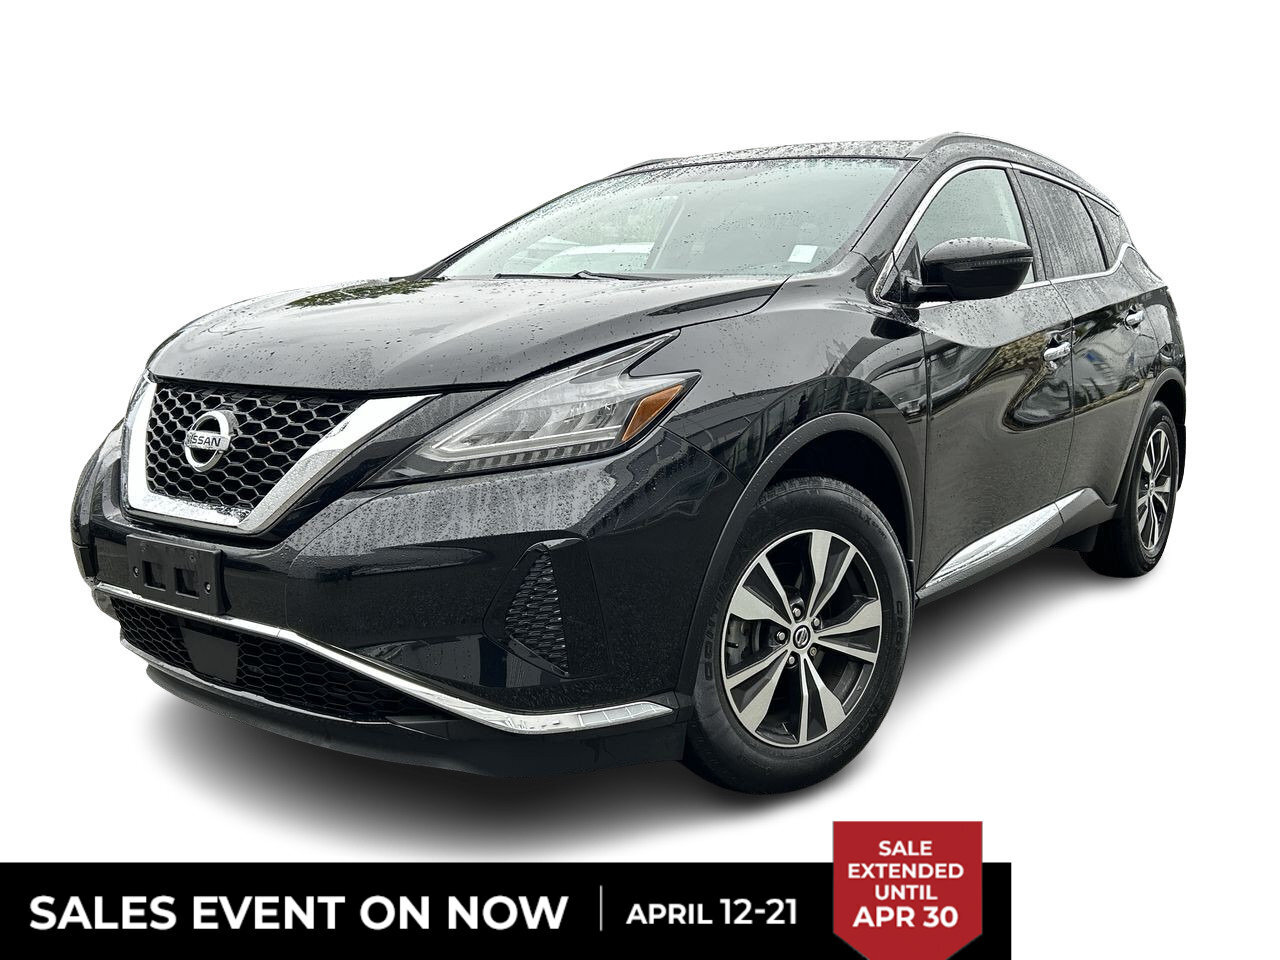 2020 Nissan Murano S FWD CVT *Local, One Owner*